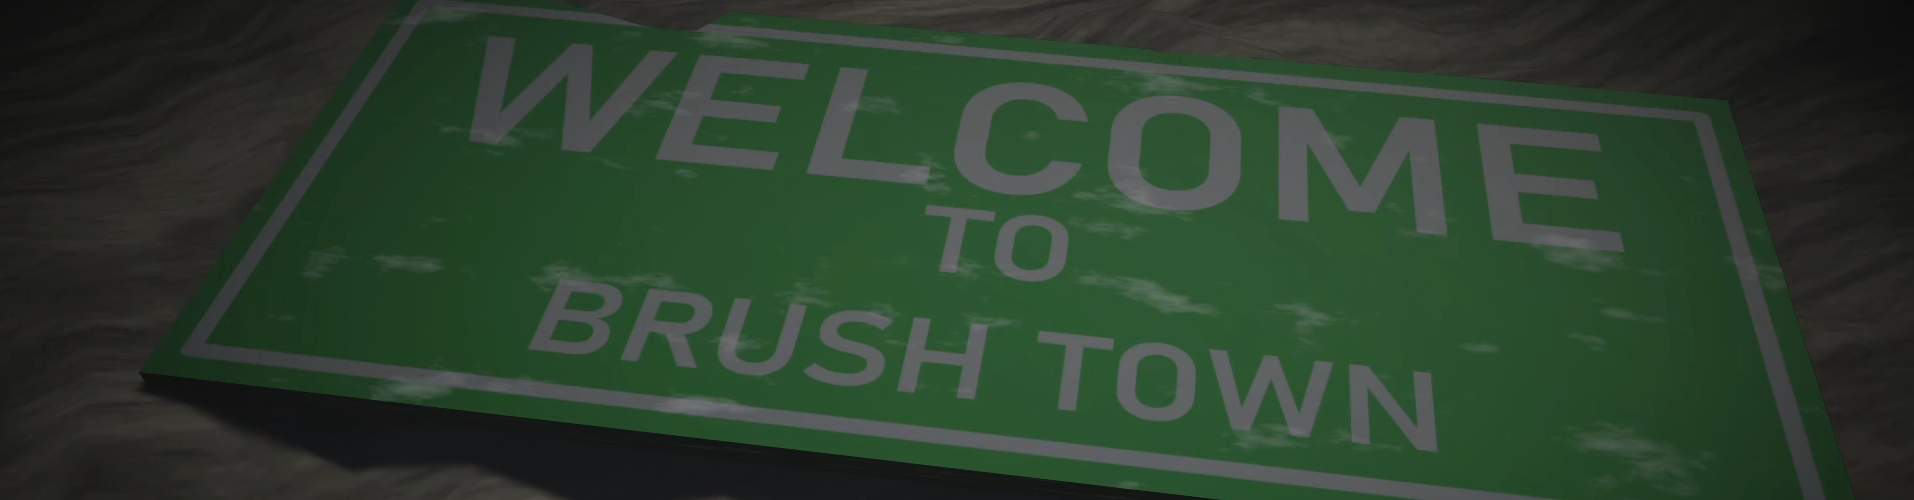 Welcome to Brushtown